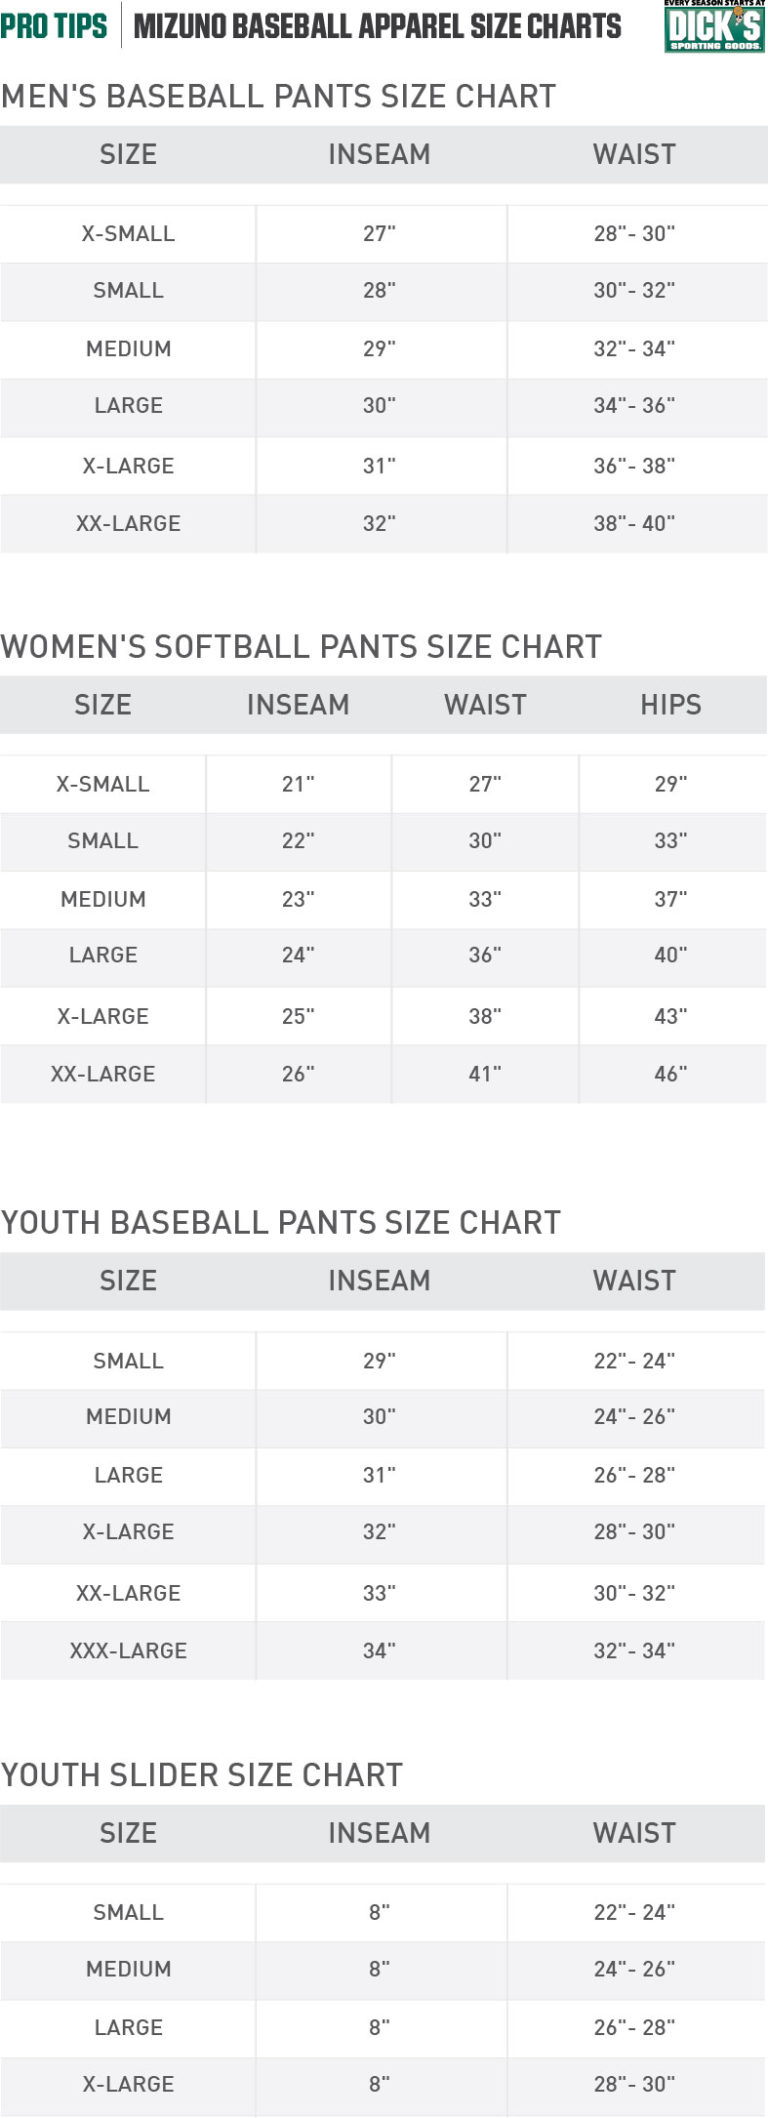 Mizuno® Apparel Size Charts PRO TIPS by DICK'S Sporting Goods